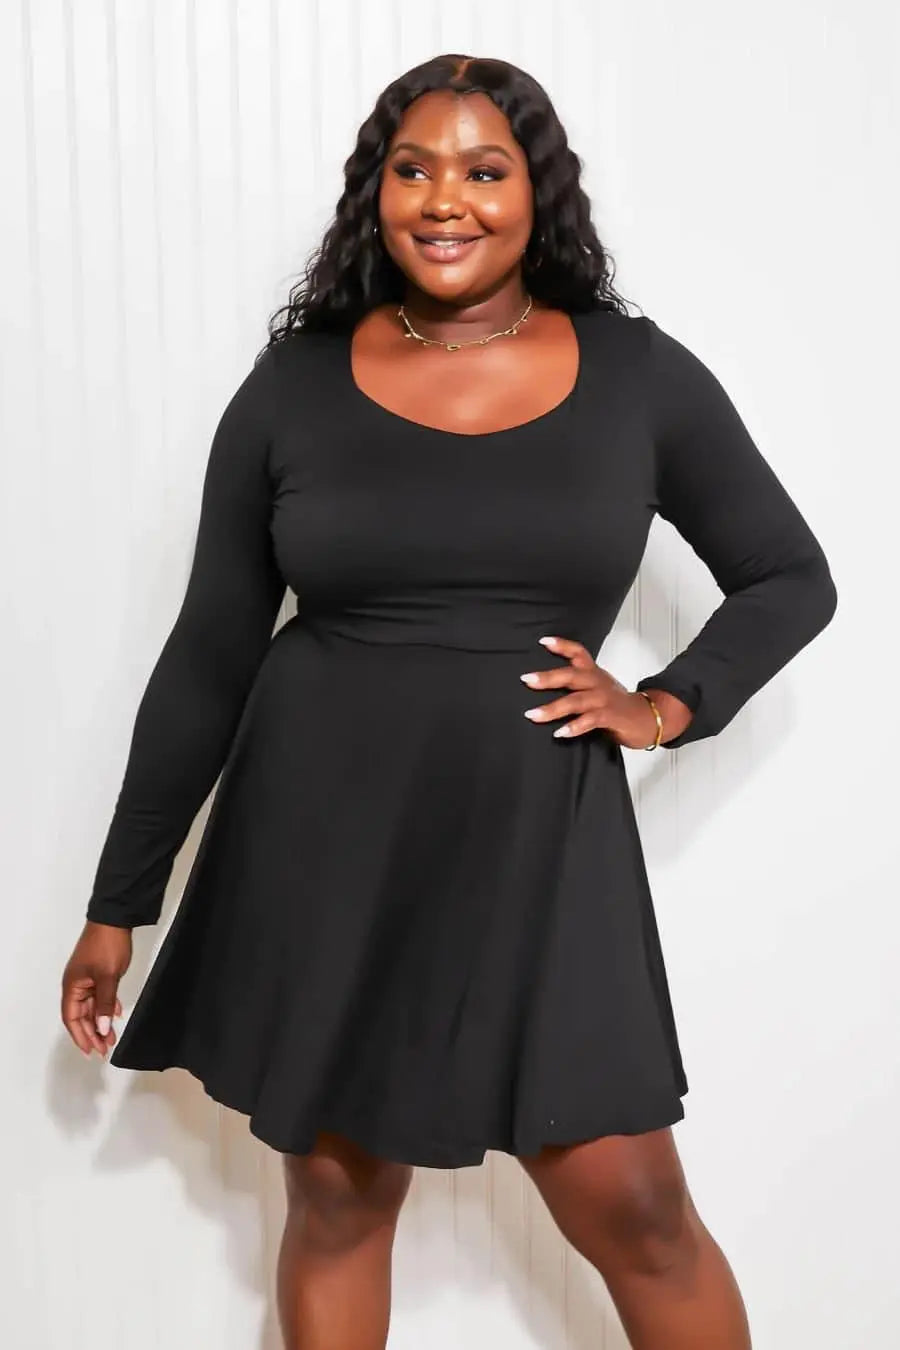 Black Not-So-Basic Dress-dress-Styled by Steph-Styled by Steph-Women's Fashion Clothing Boutique, Indiana